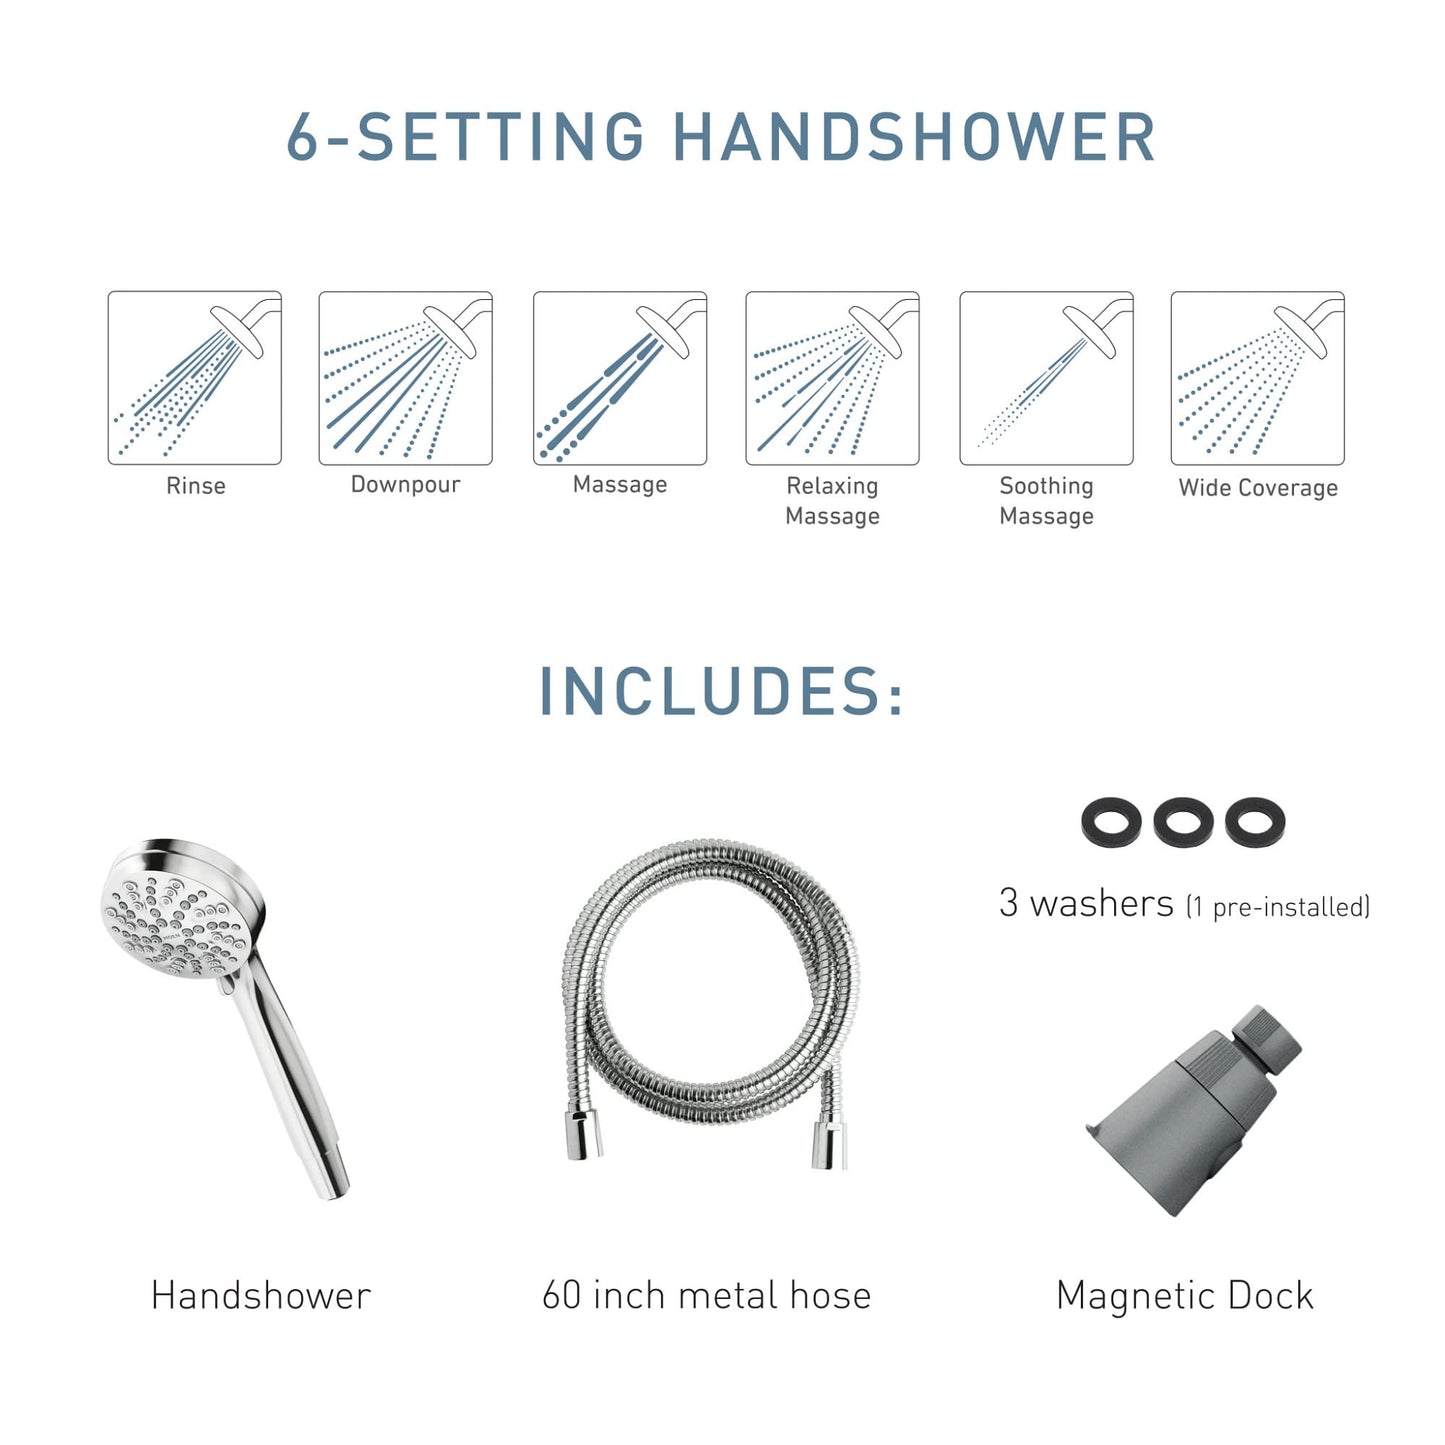 Moen Engage Magnetix Spot Resist Brushed Nickel 3.5-Inch Six-Function Eco-Performance Handheld Showerhead with Magnetic Docking System for Bathroom Shower, 26100SRN - Like New